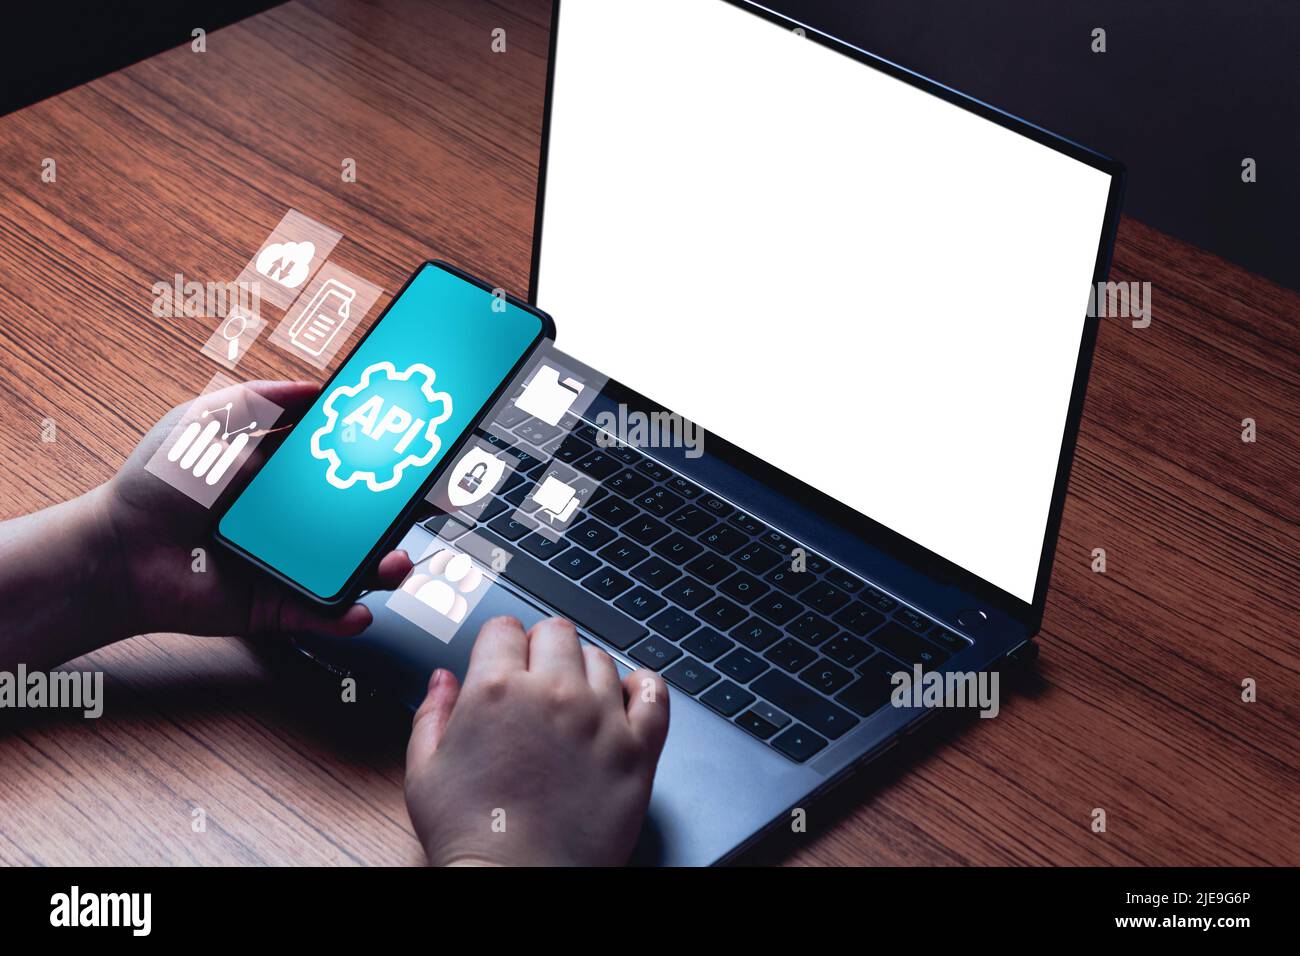 API concept with smartphone interface and blank laptop screen for mockup. Application Programming Interface. Software Development. Stock Photo